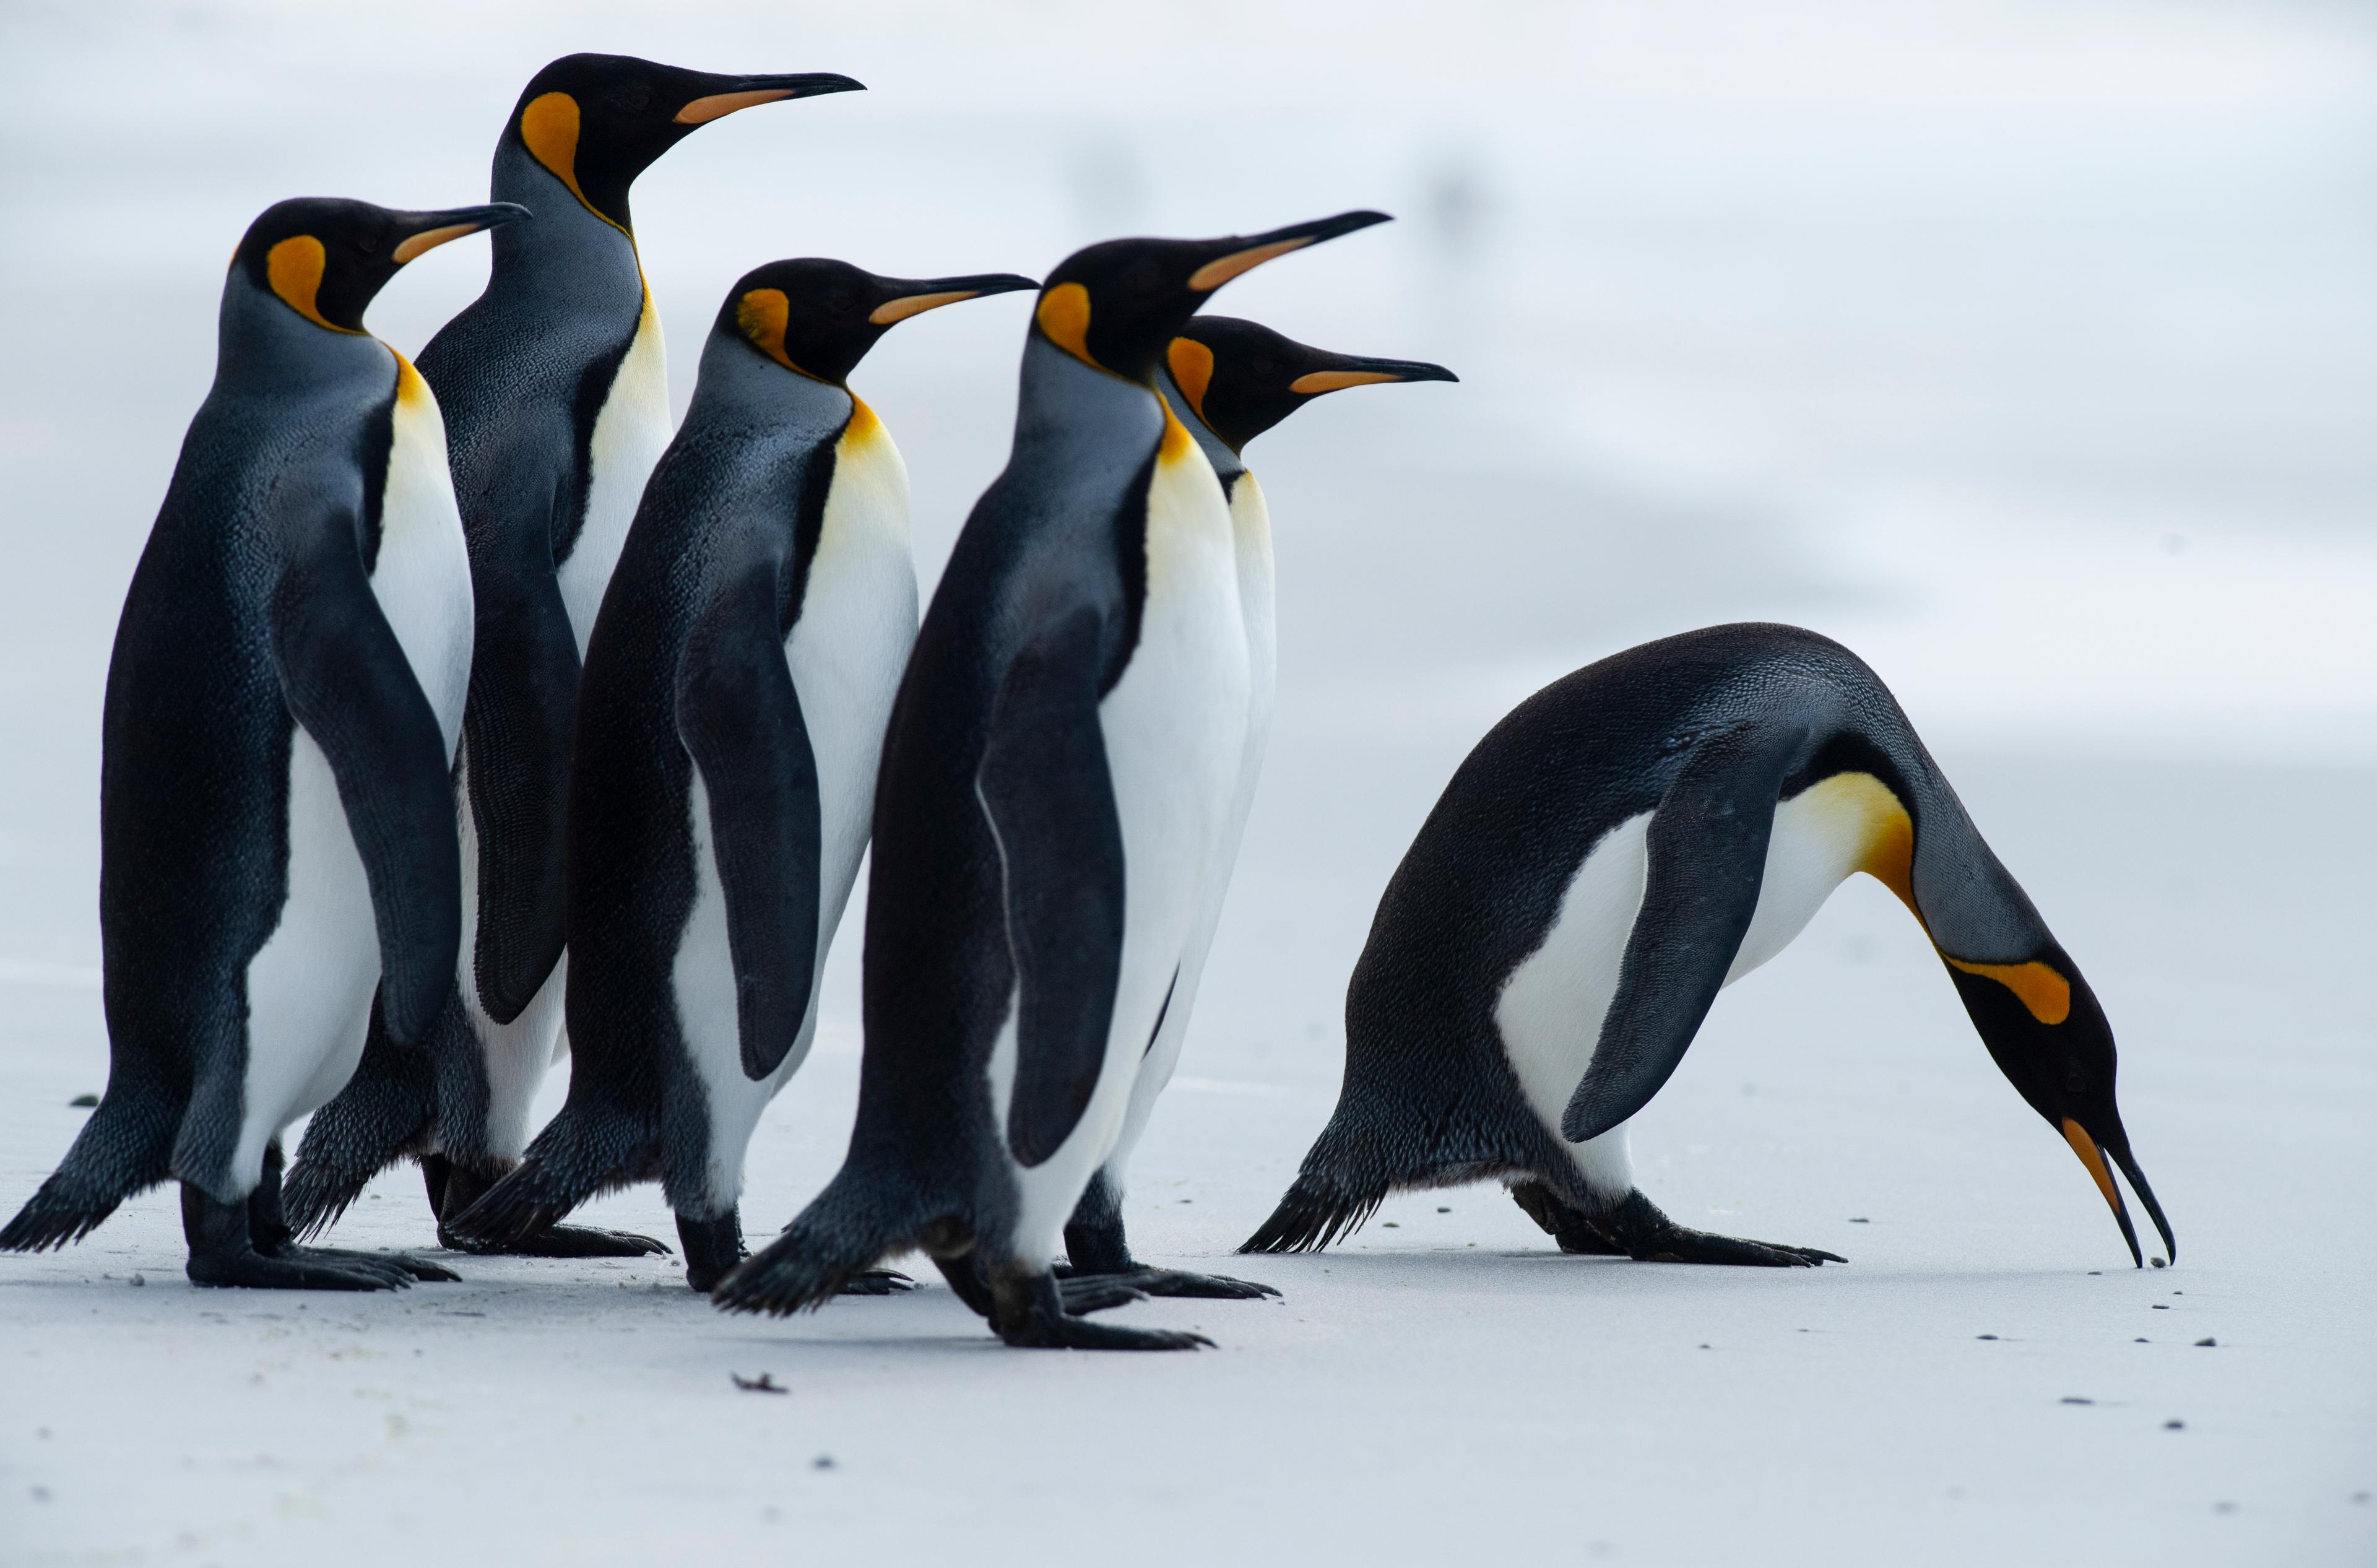 King penguins are seen at Volunteer Point, north of Stanley in the Falkland Islands (Malvinas), a British Overseas Territory in the South Atlantic Ocean, on October 6, 2019. - The Falklands have an incredibly rich biodiversity including more than 25 species of whales and dolphins, but it is the guaranteed ability to get up close and personal with penguins that makes it such an enticing destination. There are five penguin species in the archipelago -- King, Rockhopper, Gentoo, Magellanic and Macaroni. (Photo by Pablo PORCIUNCULA BRUNE / AFP)